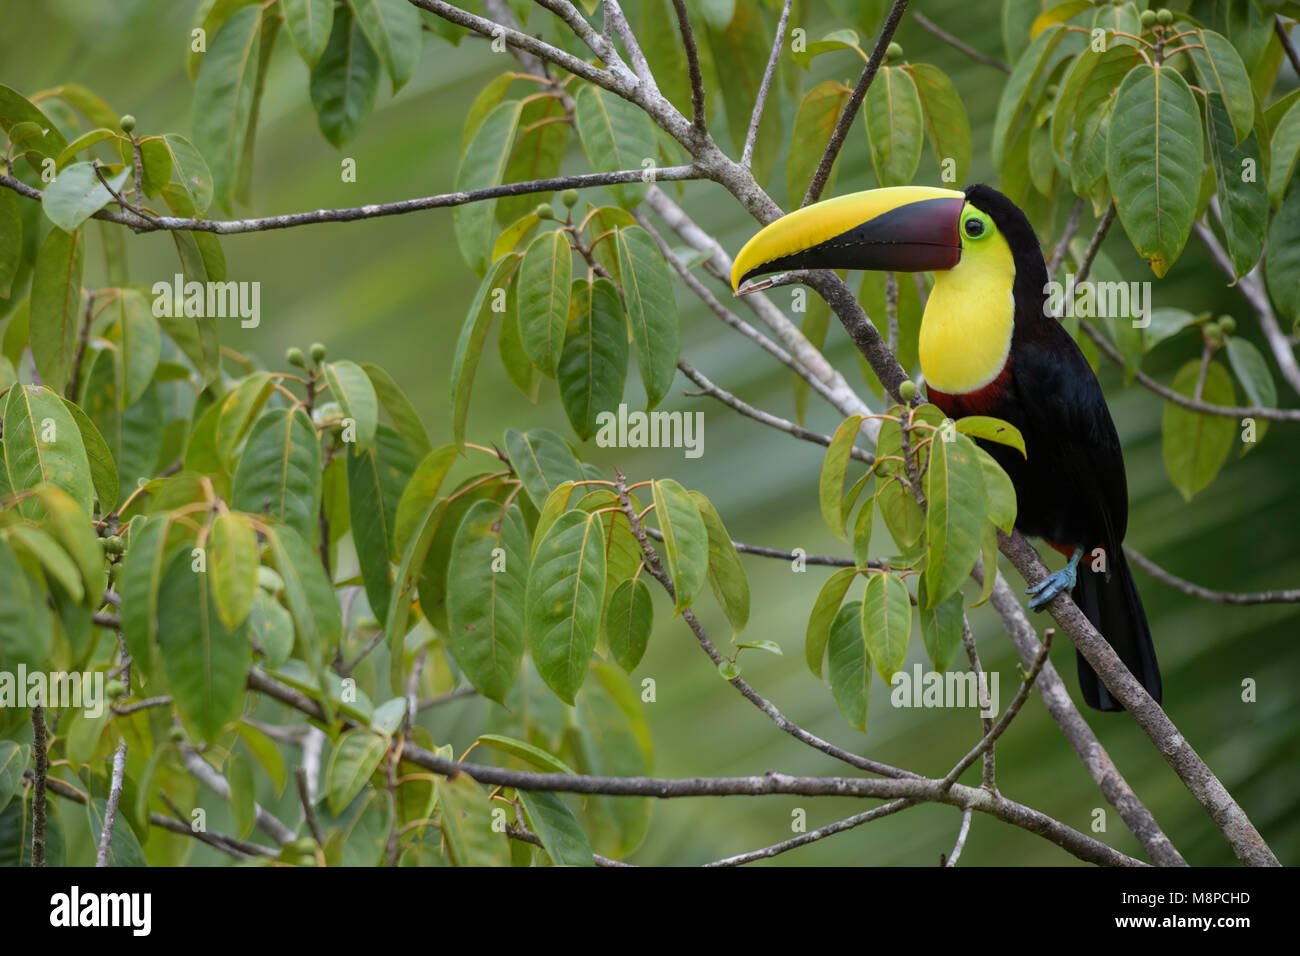 Yellow-throated toucan - Ramphastos ambiguus, large colorful toucan from Costa Rica forest. Stock Photo